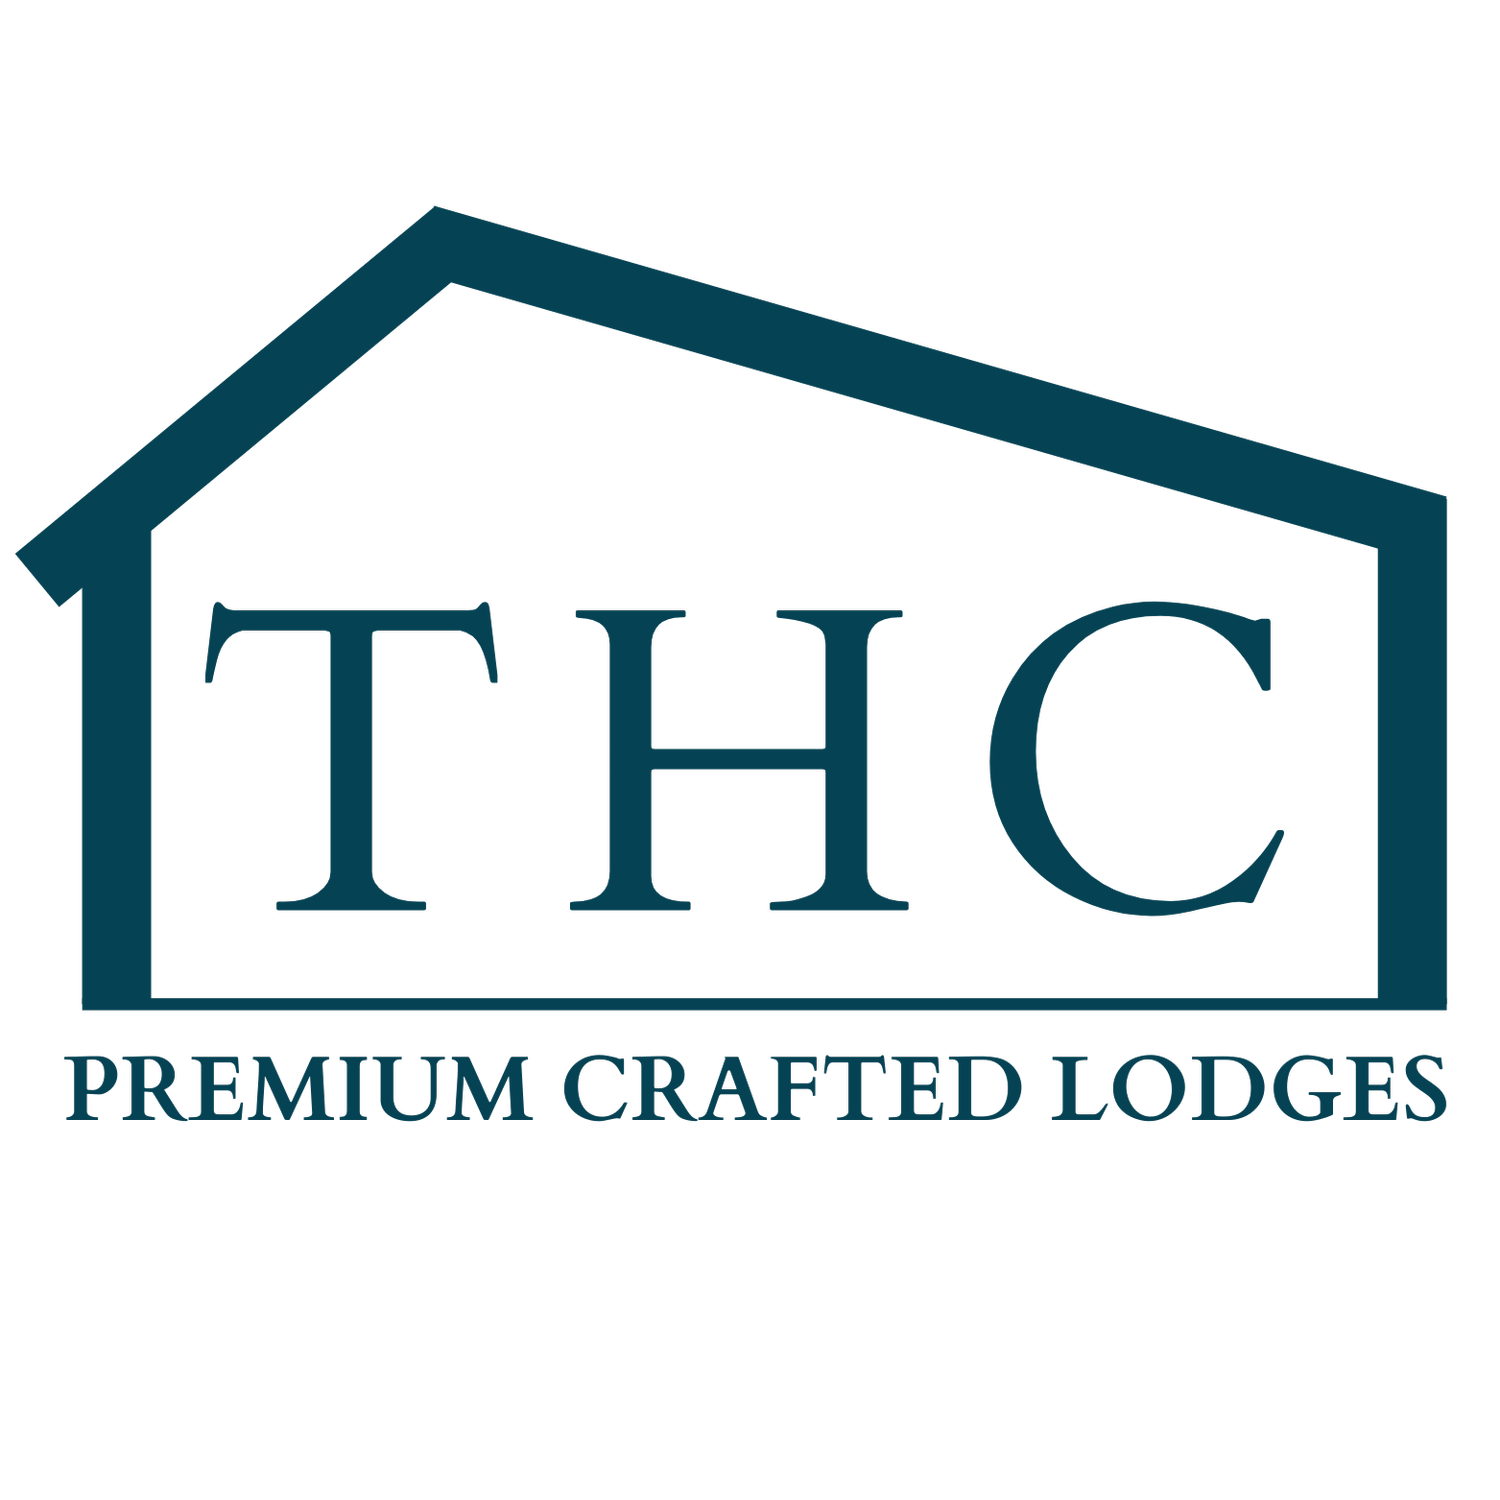 THC Lodges - Luxury, Eco-Friendly, Sustainable Lodge and Cabin Manufacturer